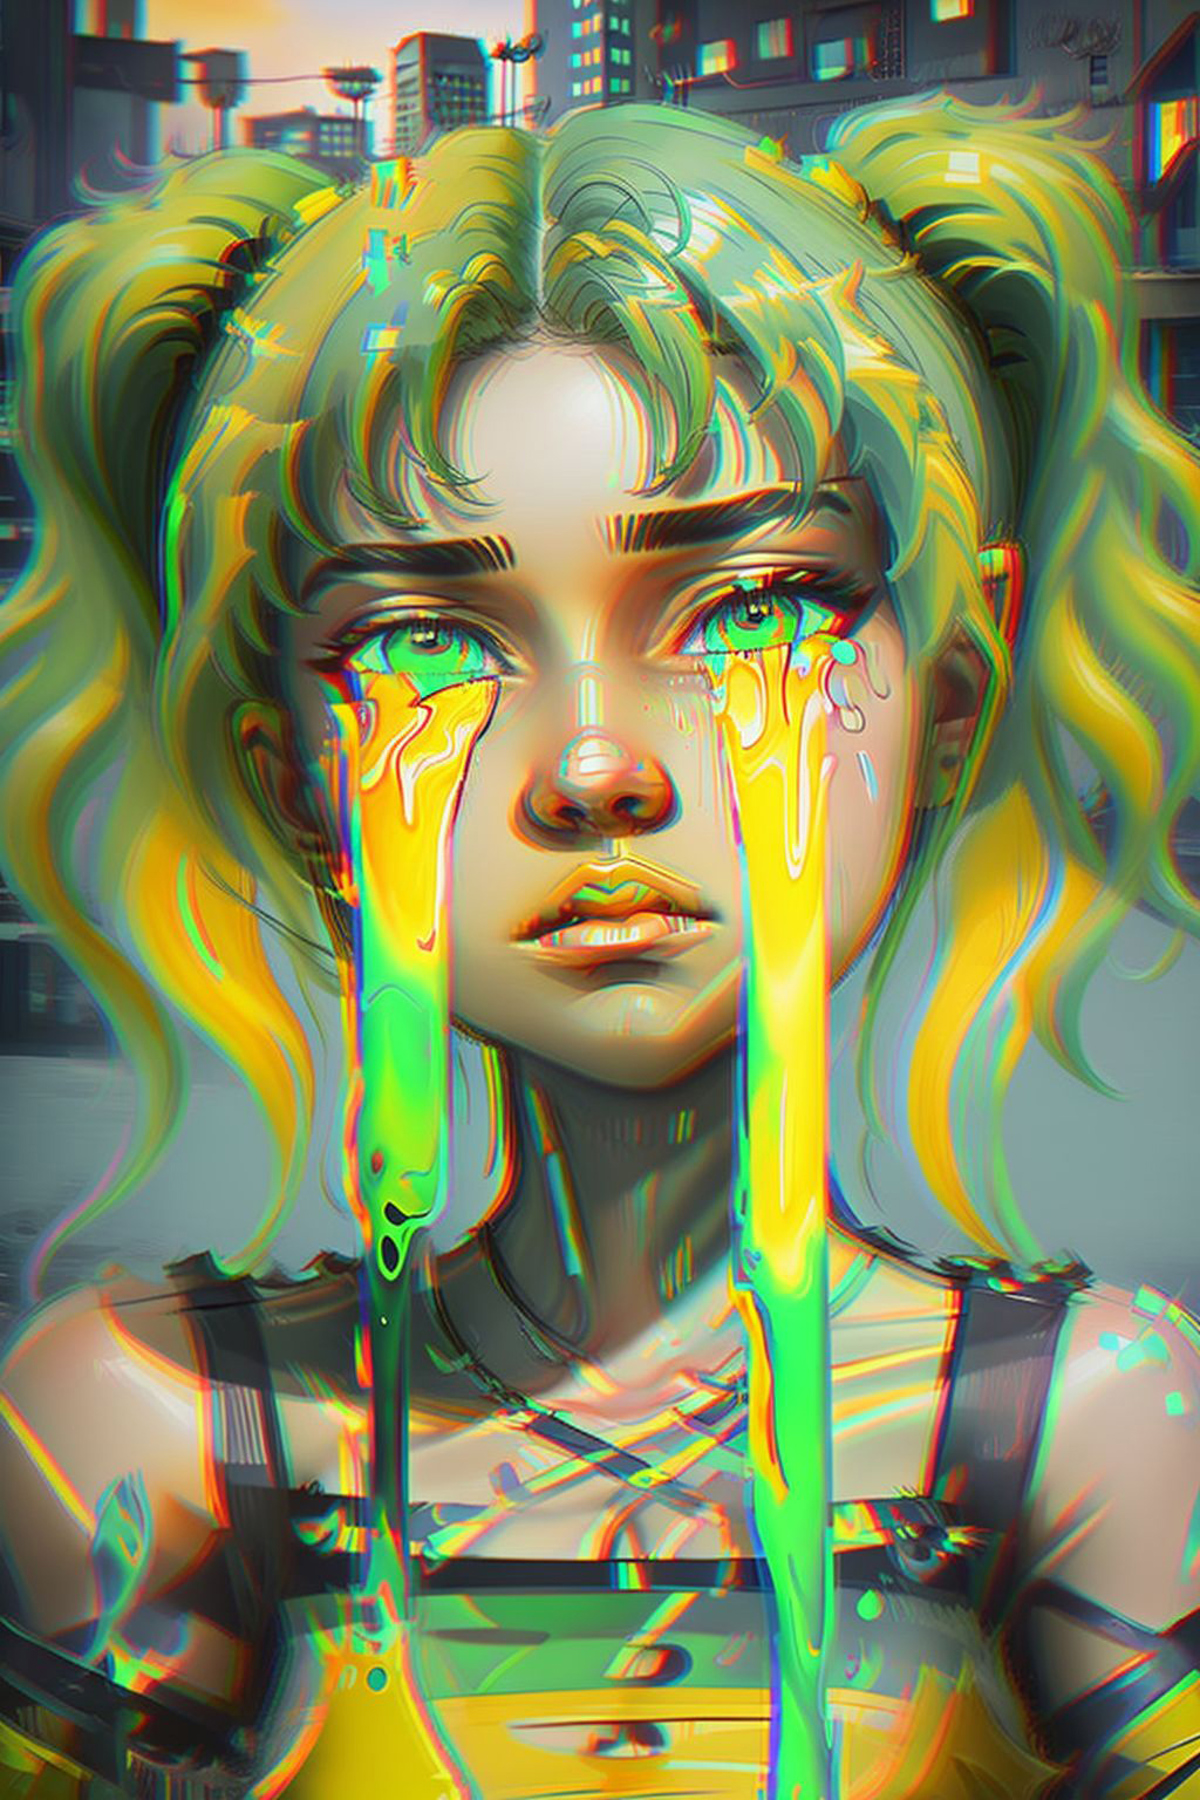 Trippy Spilled Eyes image by PANyZHAL